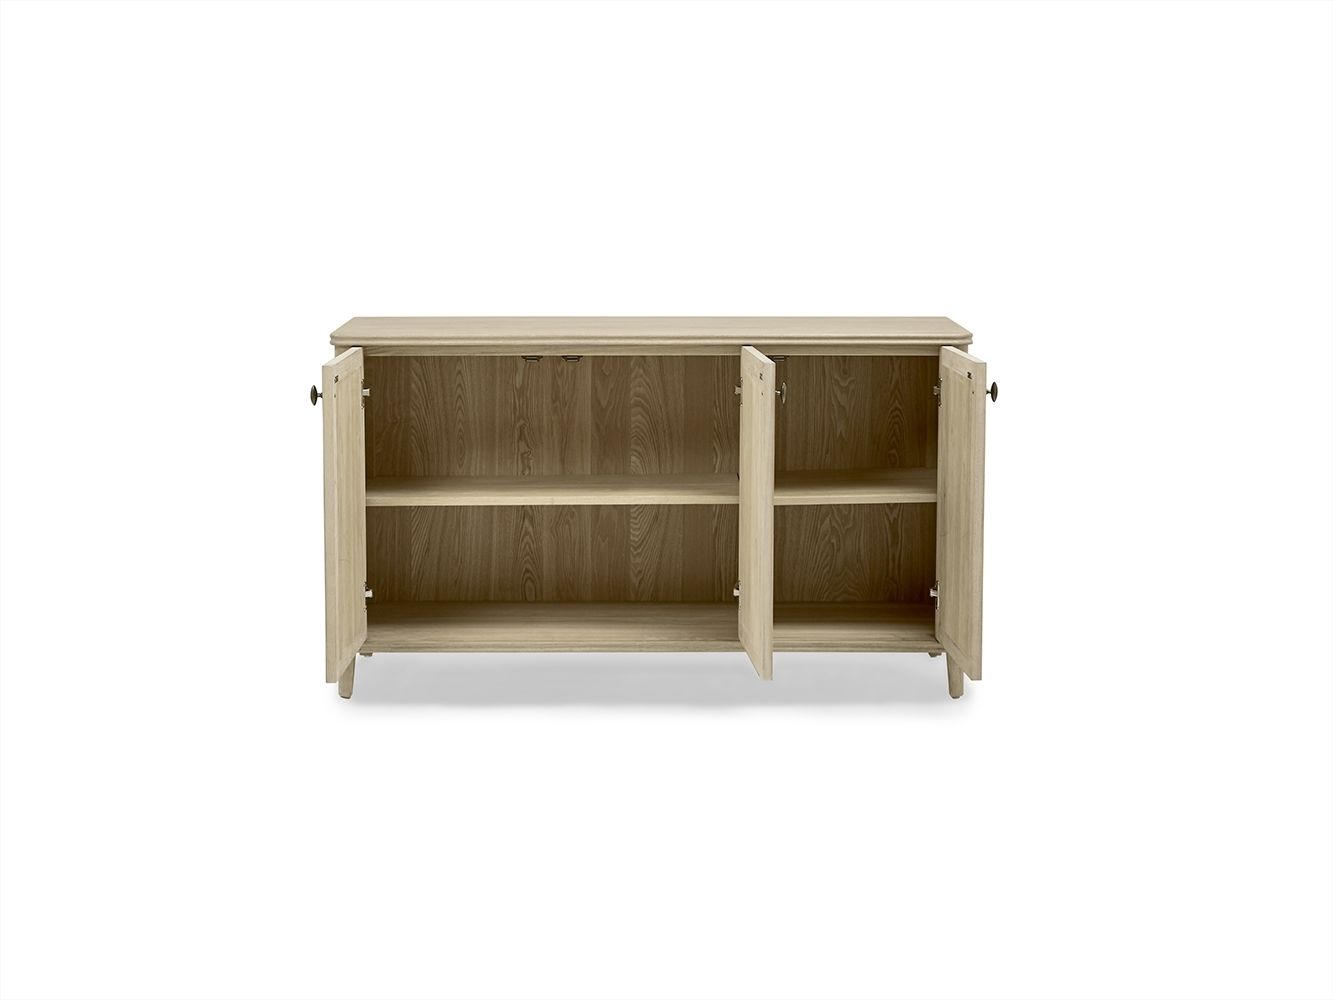 Grand Fandangle Sideboard | Parquet Wood Sideboard | Loaf Intended For Current Parquet Sideboards (View 10 of 20)